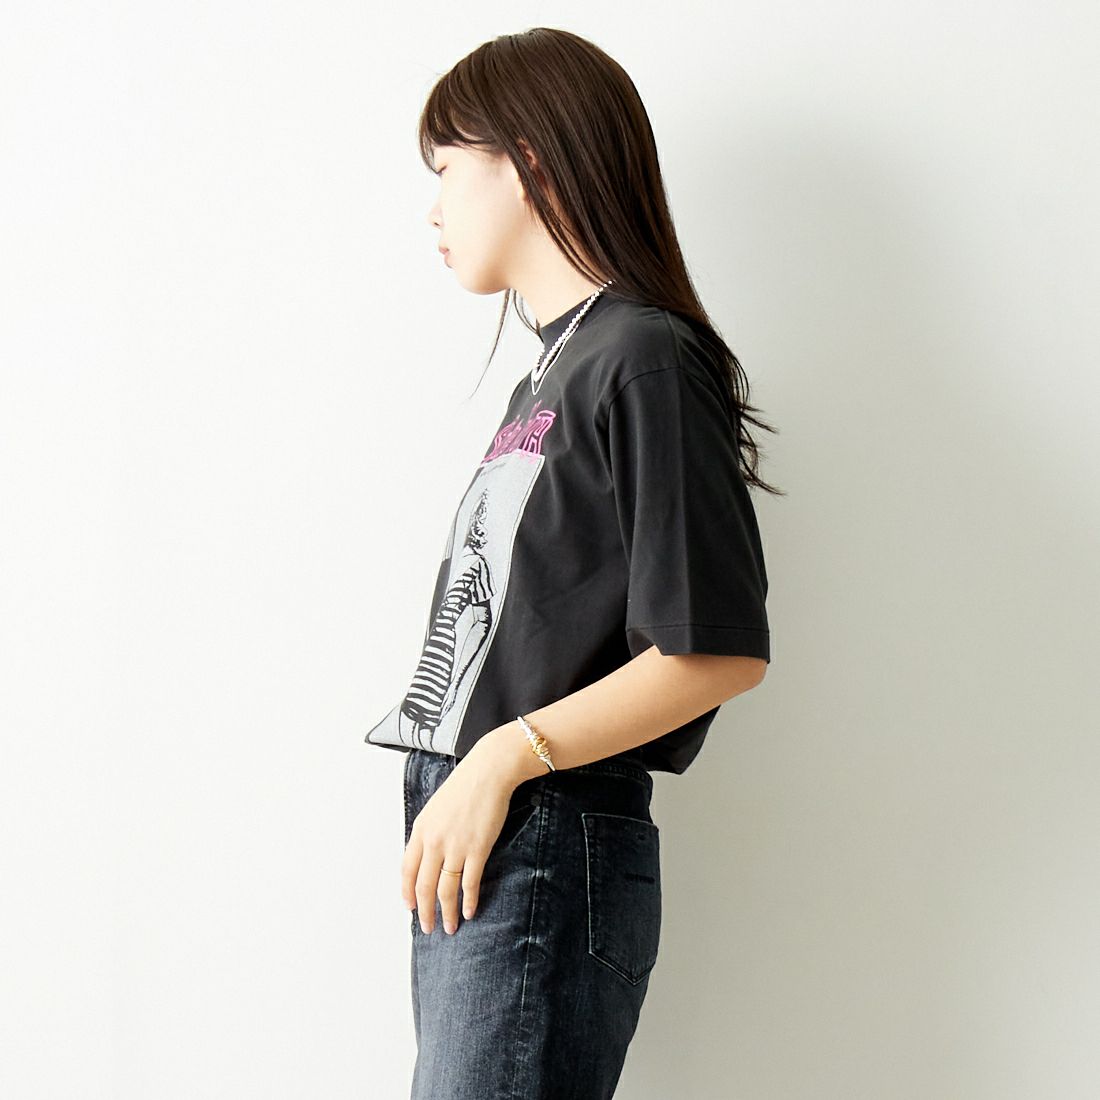 blurhms ROOTSTOCK [ブラームス ルーツストック] We dont like スタンダードプリントTシャツ [BROOTS24S33SONIC6] 02 INK BLK &&モデル身長：167cm 着用サイズ：0&&